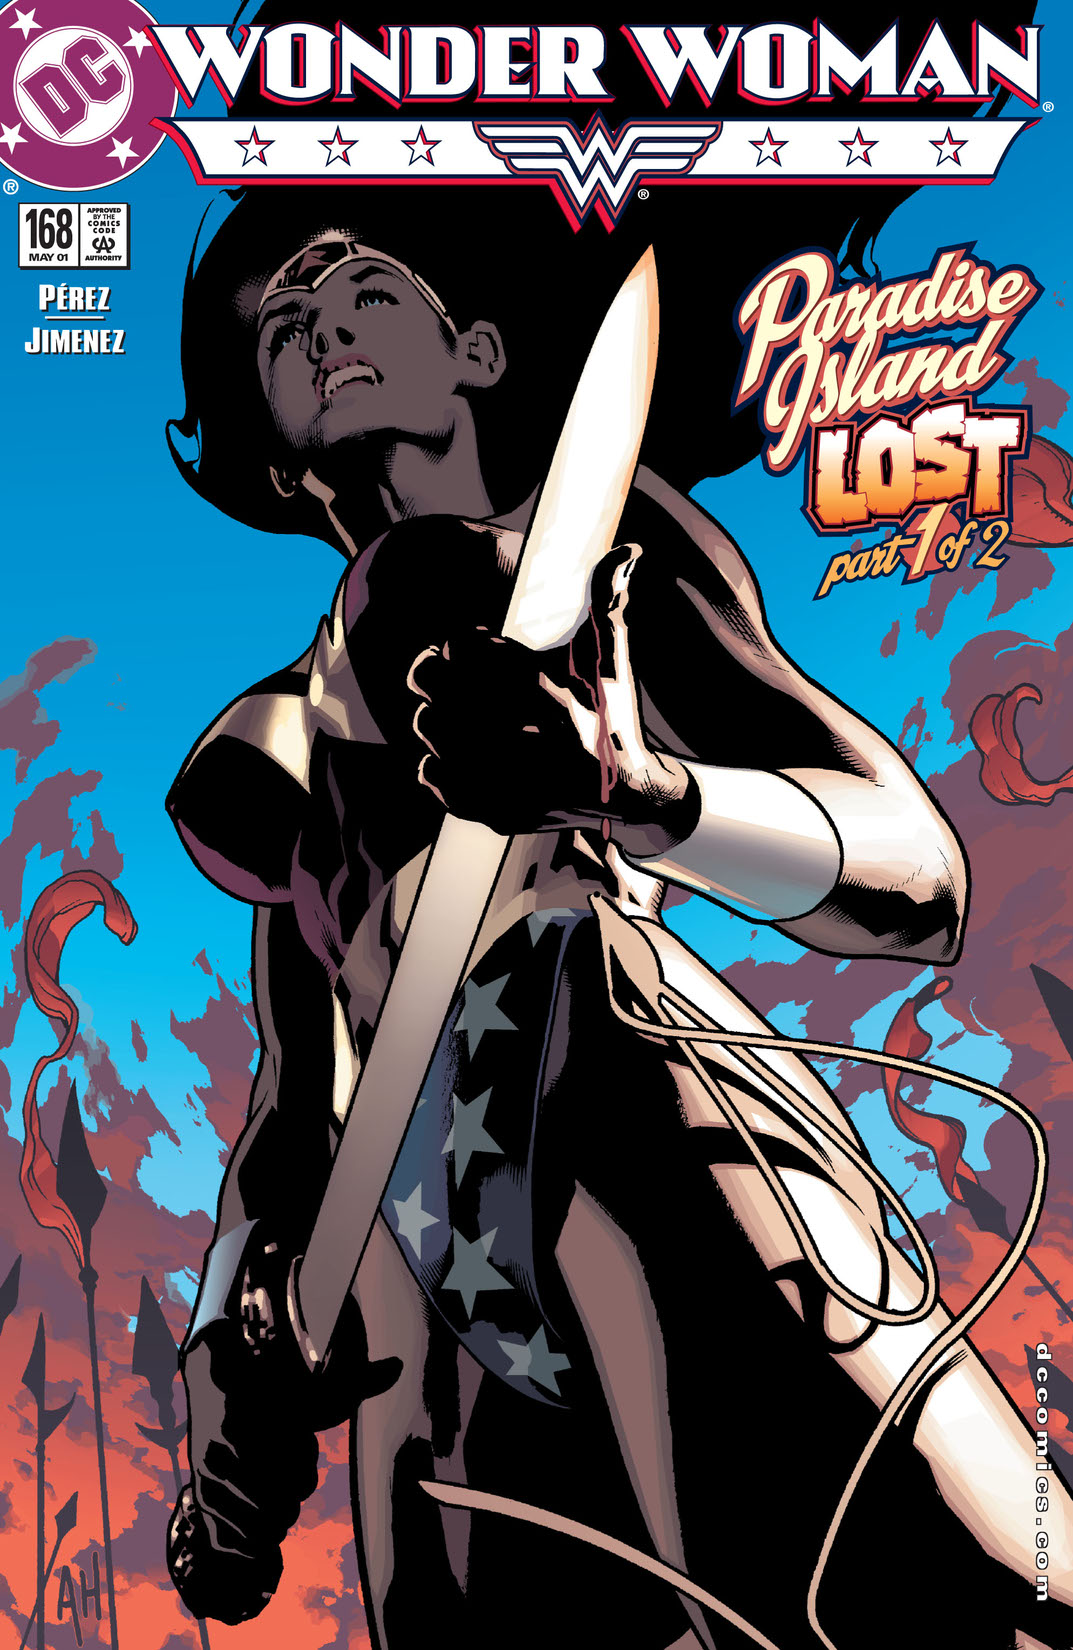 Wonder Woman (1986-) #168 preview images